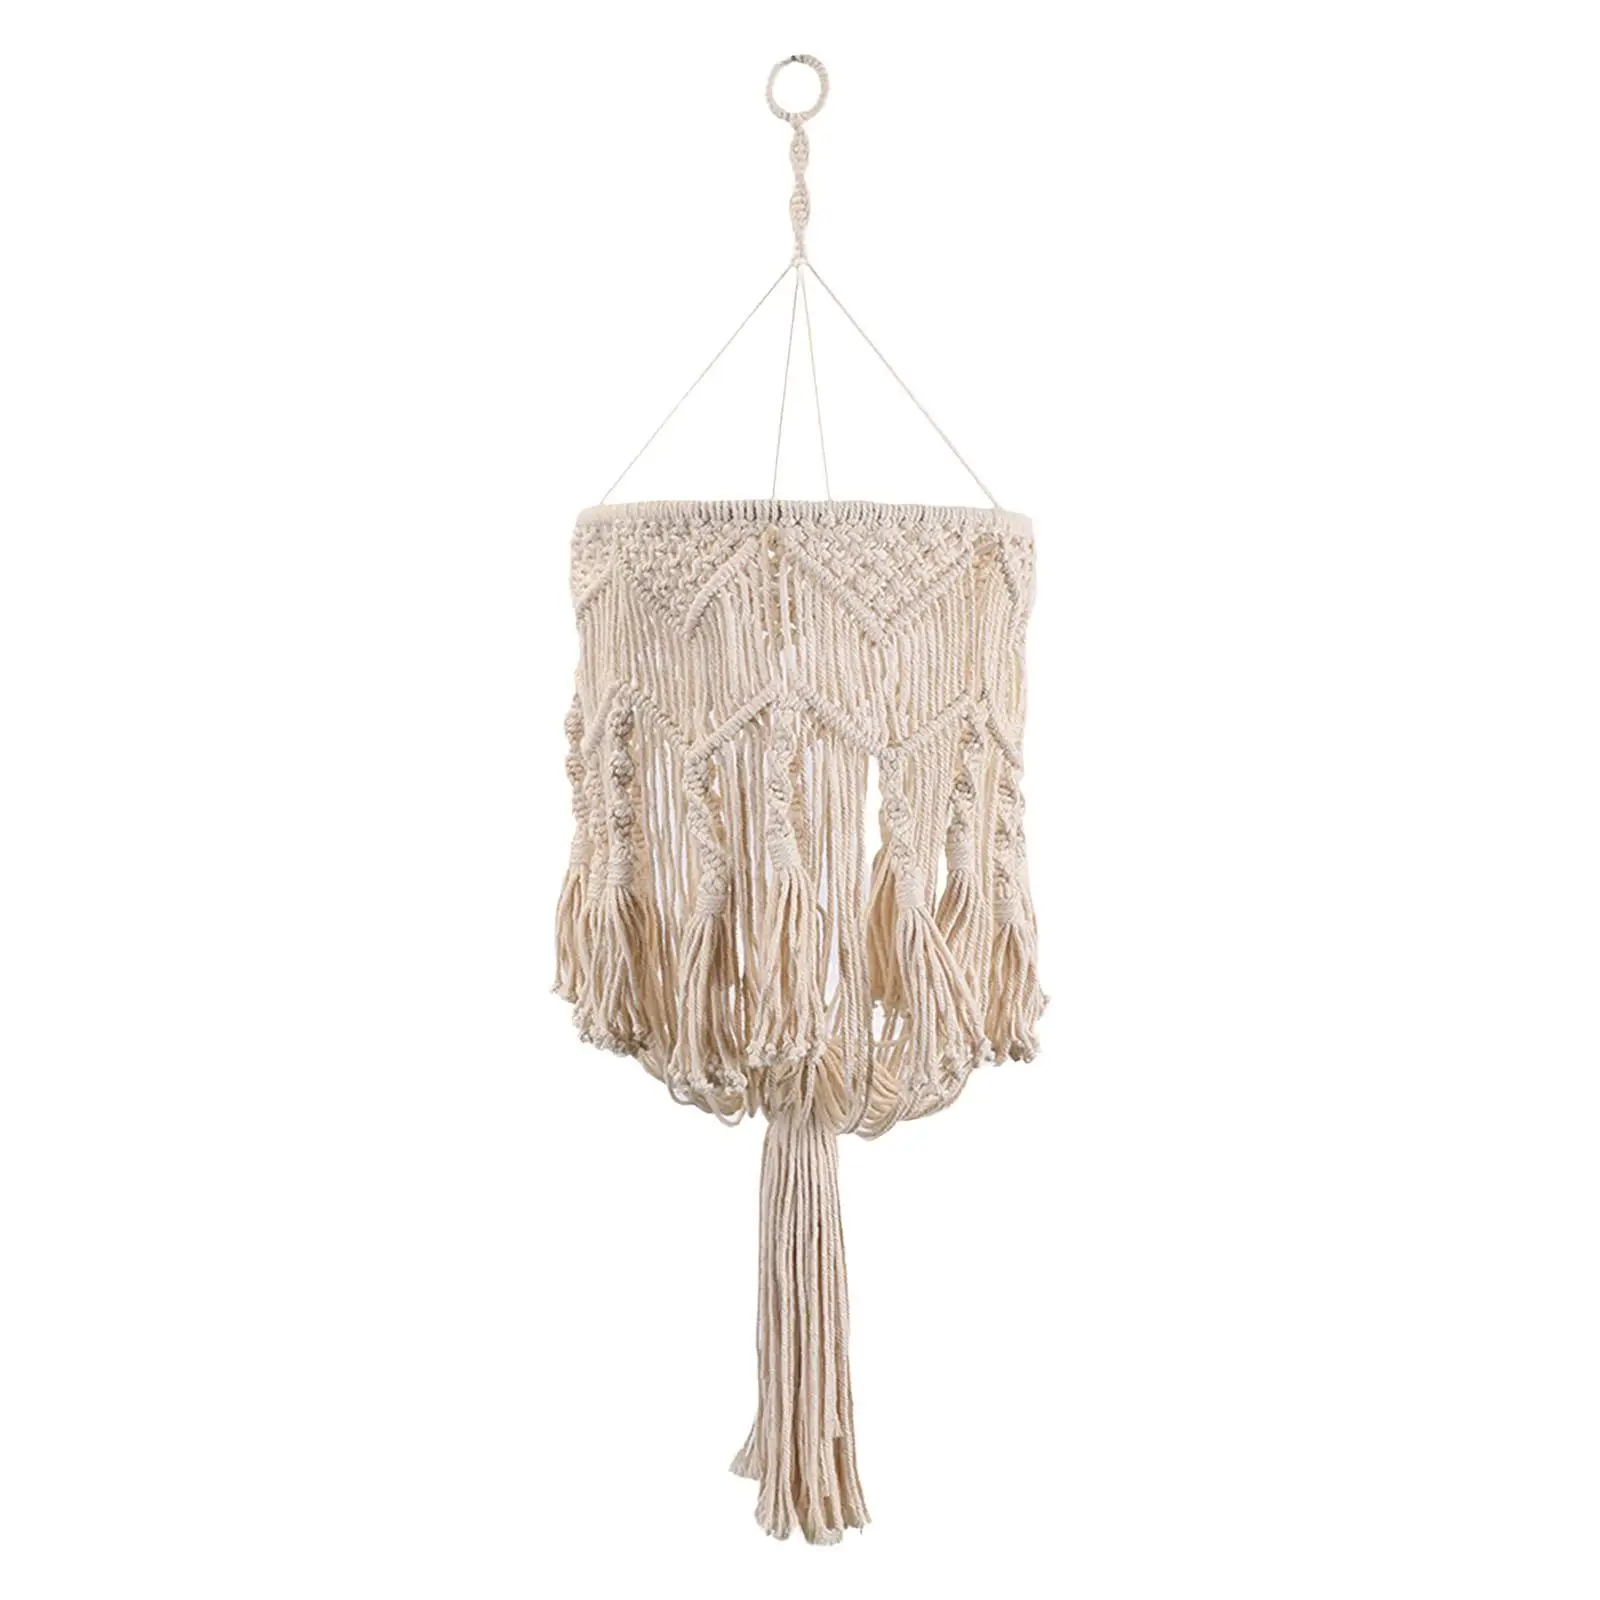 Nordic Macrame Lamp Shade Ceiling Light Cover Boho Handmade Woven Hanging Lampshade for Wedding Party Bedroom Office Decoration